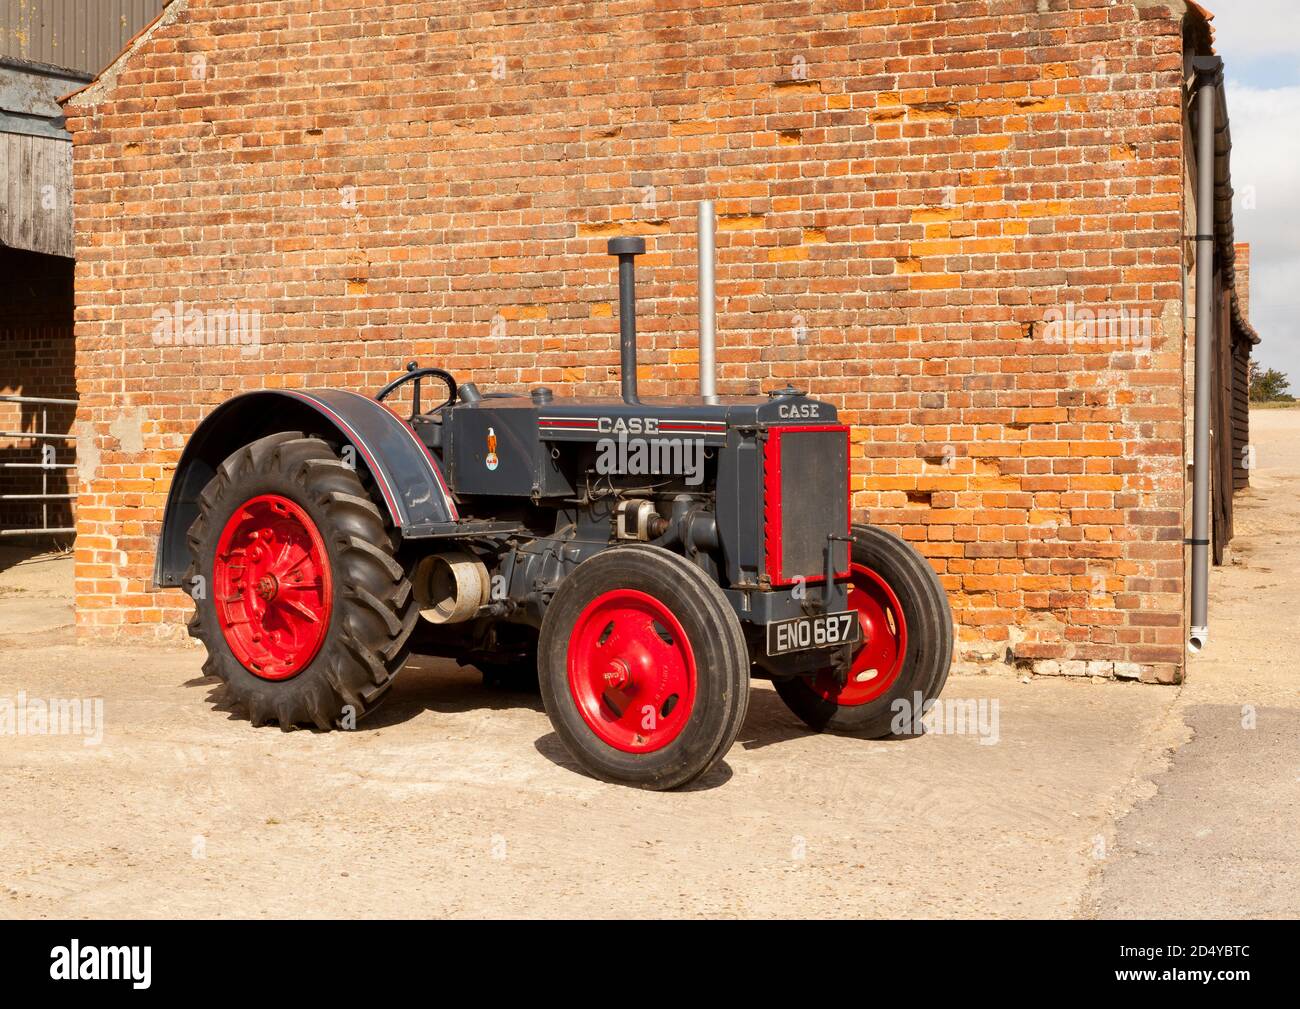 A Vintage Case C 1937 tractor Stock Photo